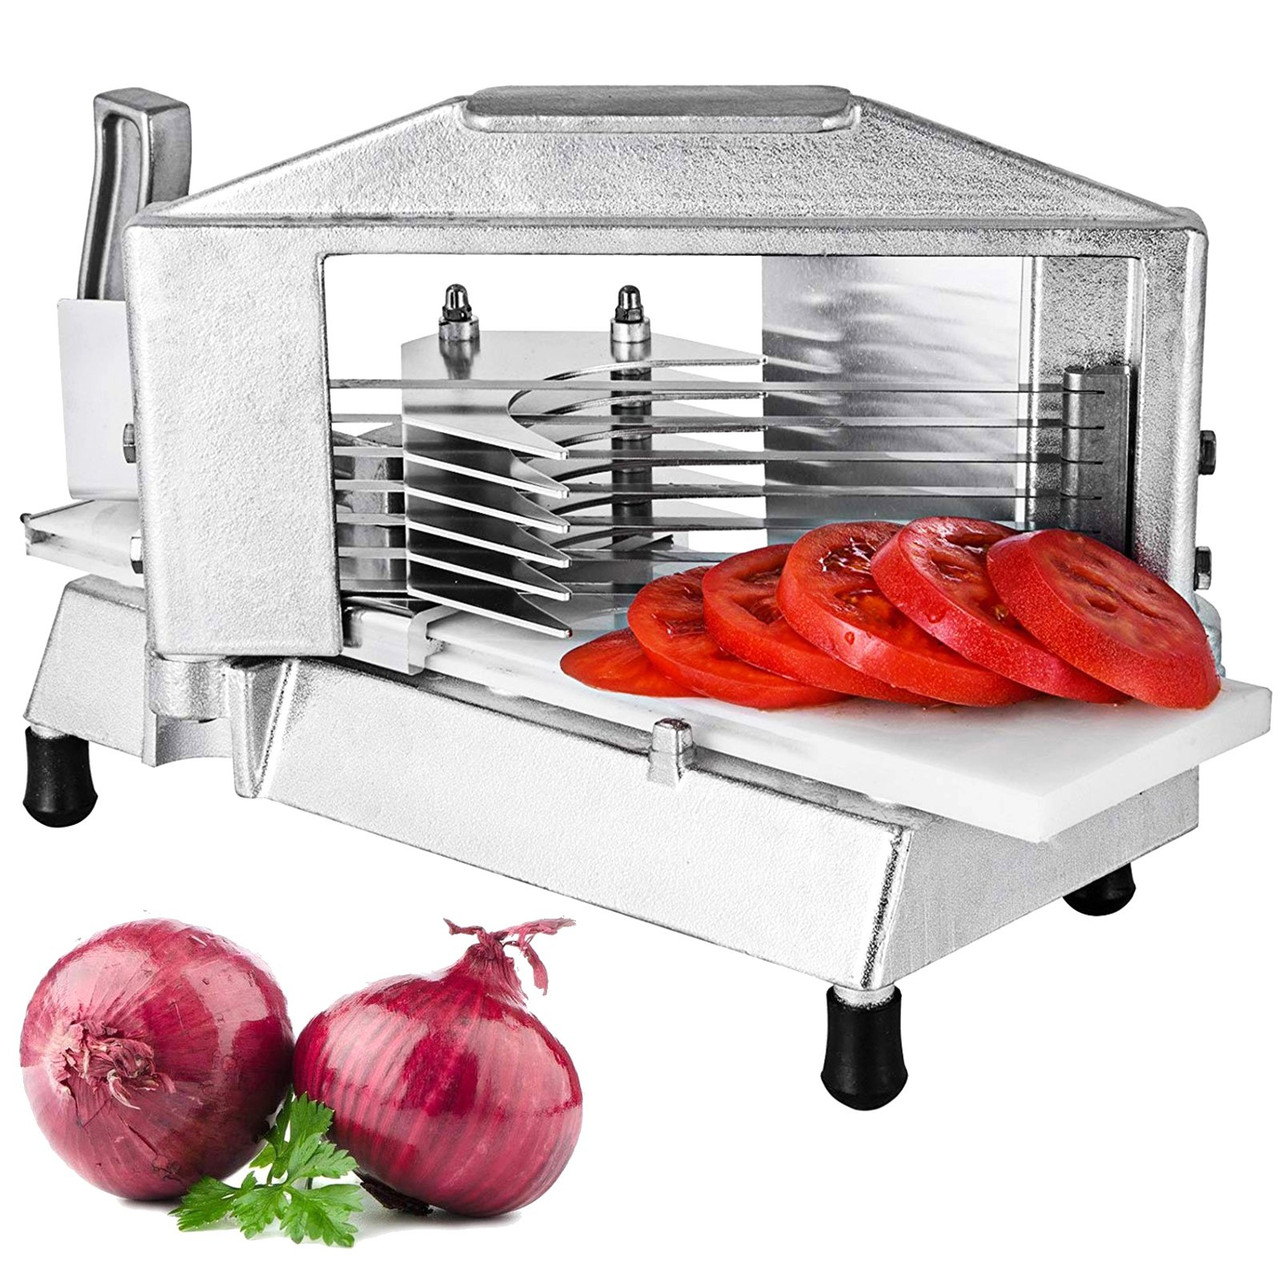 Commercial Tomato Slicer 3/8" Heavy Duty Tomato Slicer Tomato Cutter with Built in Cutting Board for Restaurant or Home Use